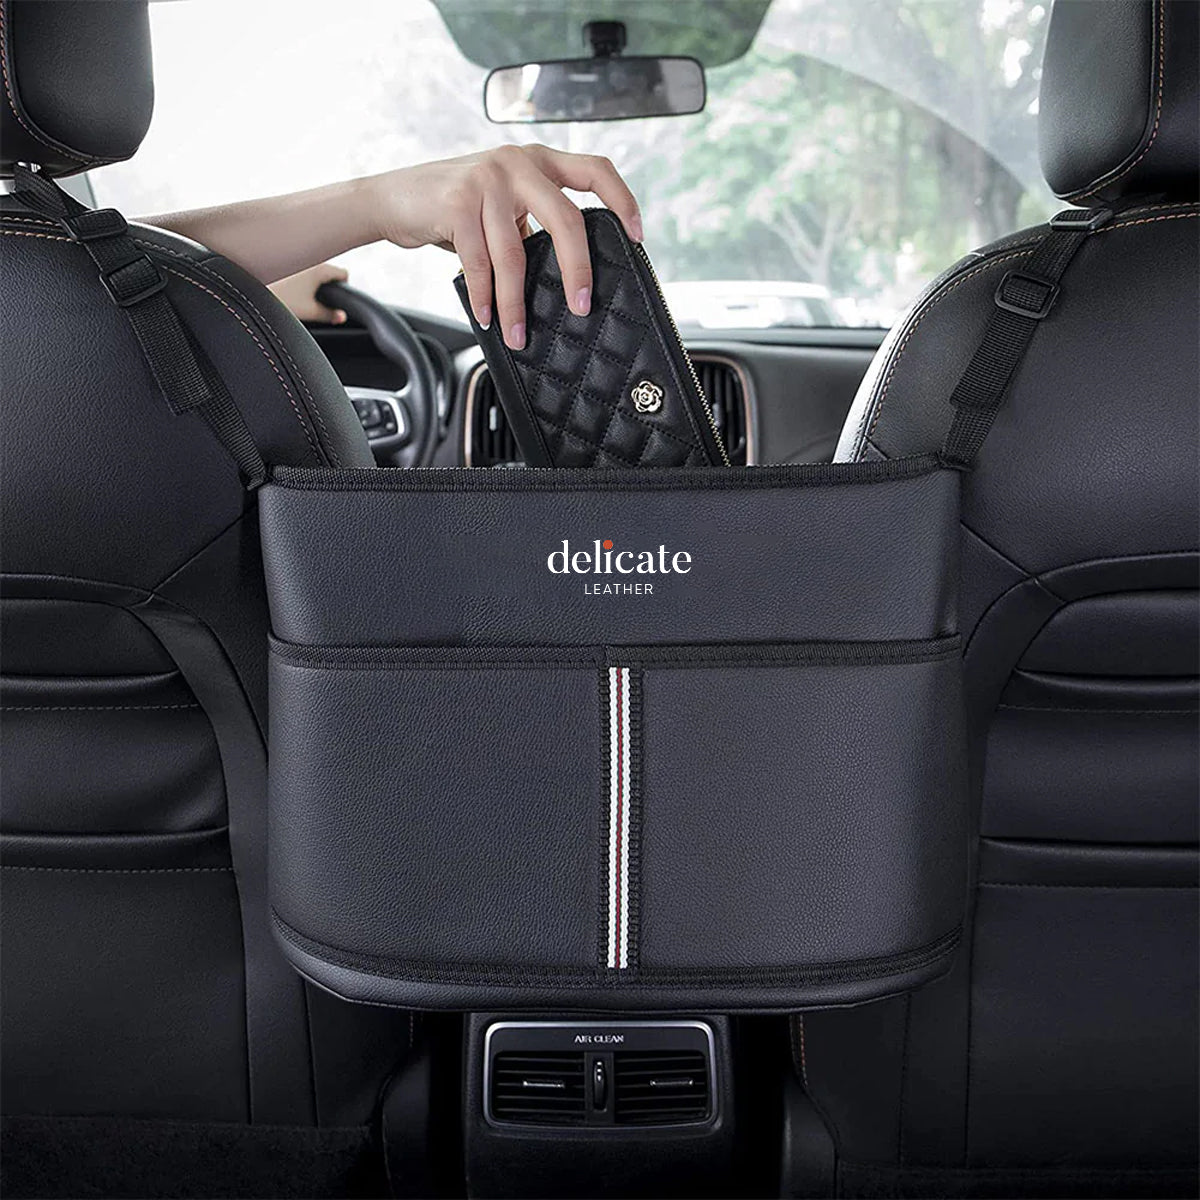 Infiniti Car Purse Holder: Keep Your Bag Secure and Accessible on the Go